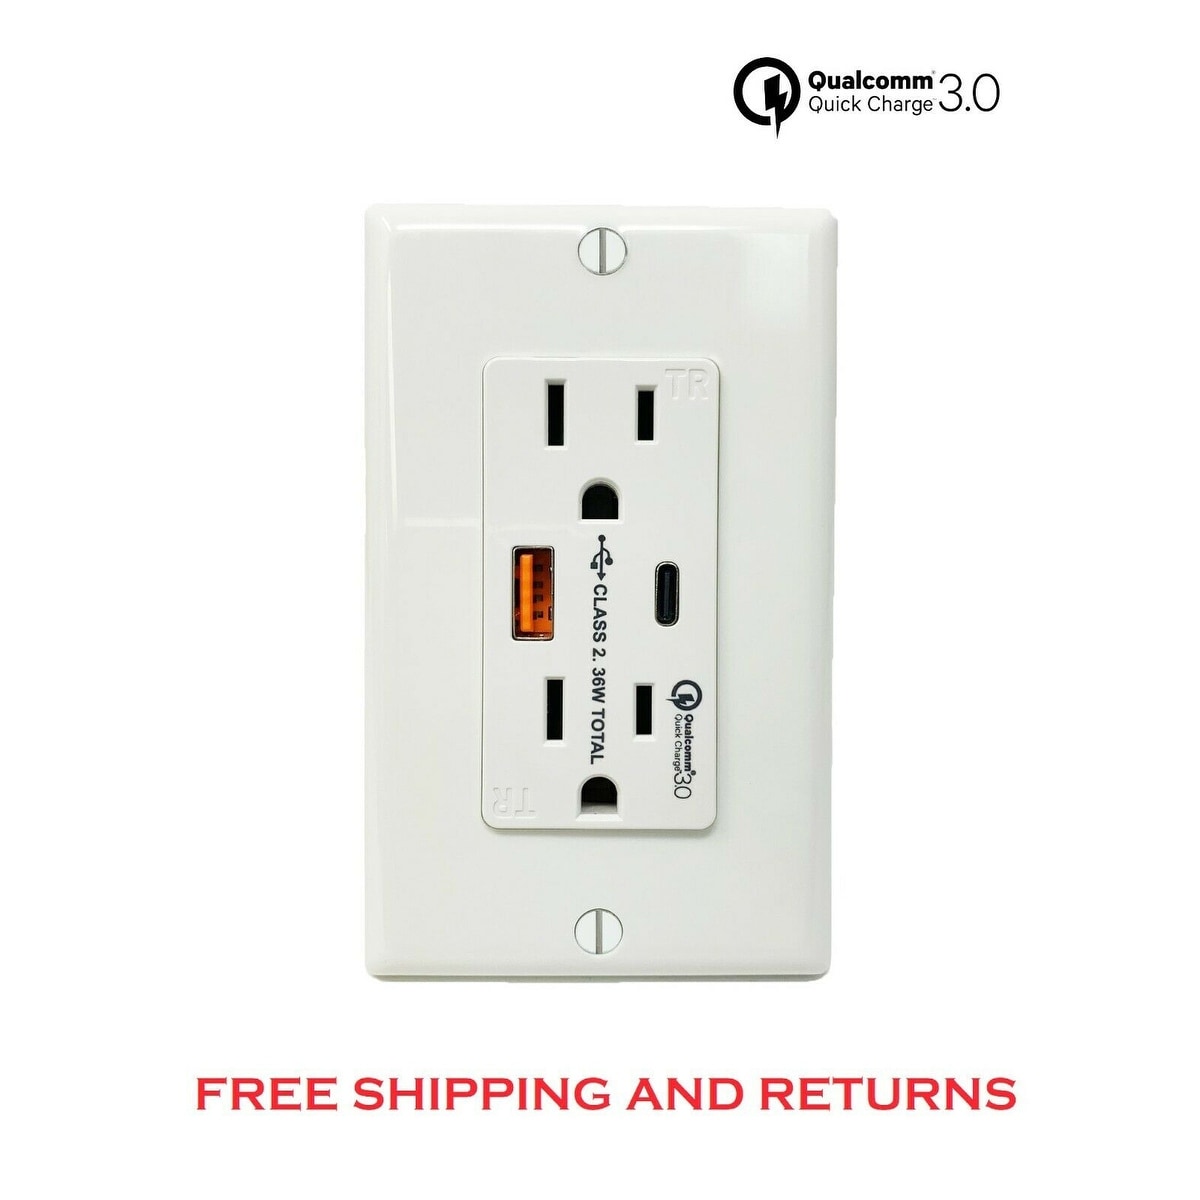 2 USB Ports Wall Charger Type I C G A Outlets 110V 220V A/C Powerful 38W with PD USB-C & QC USB-A Power 